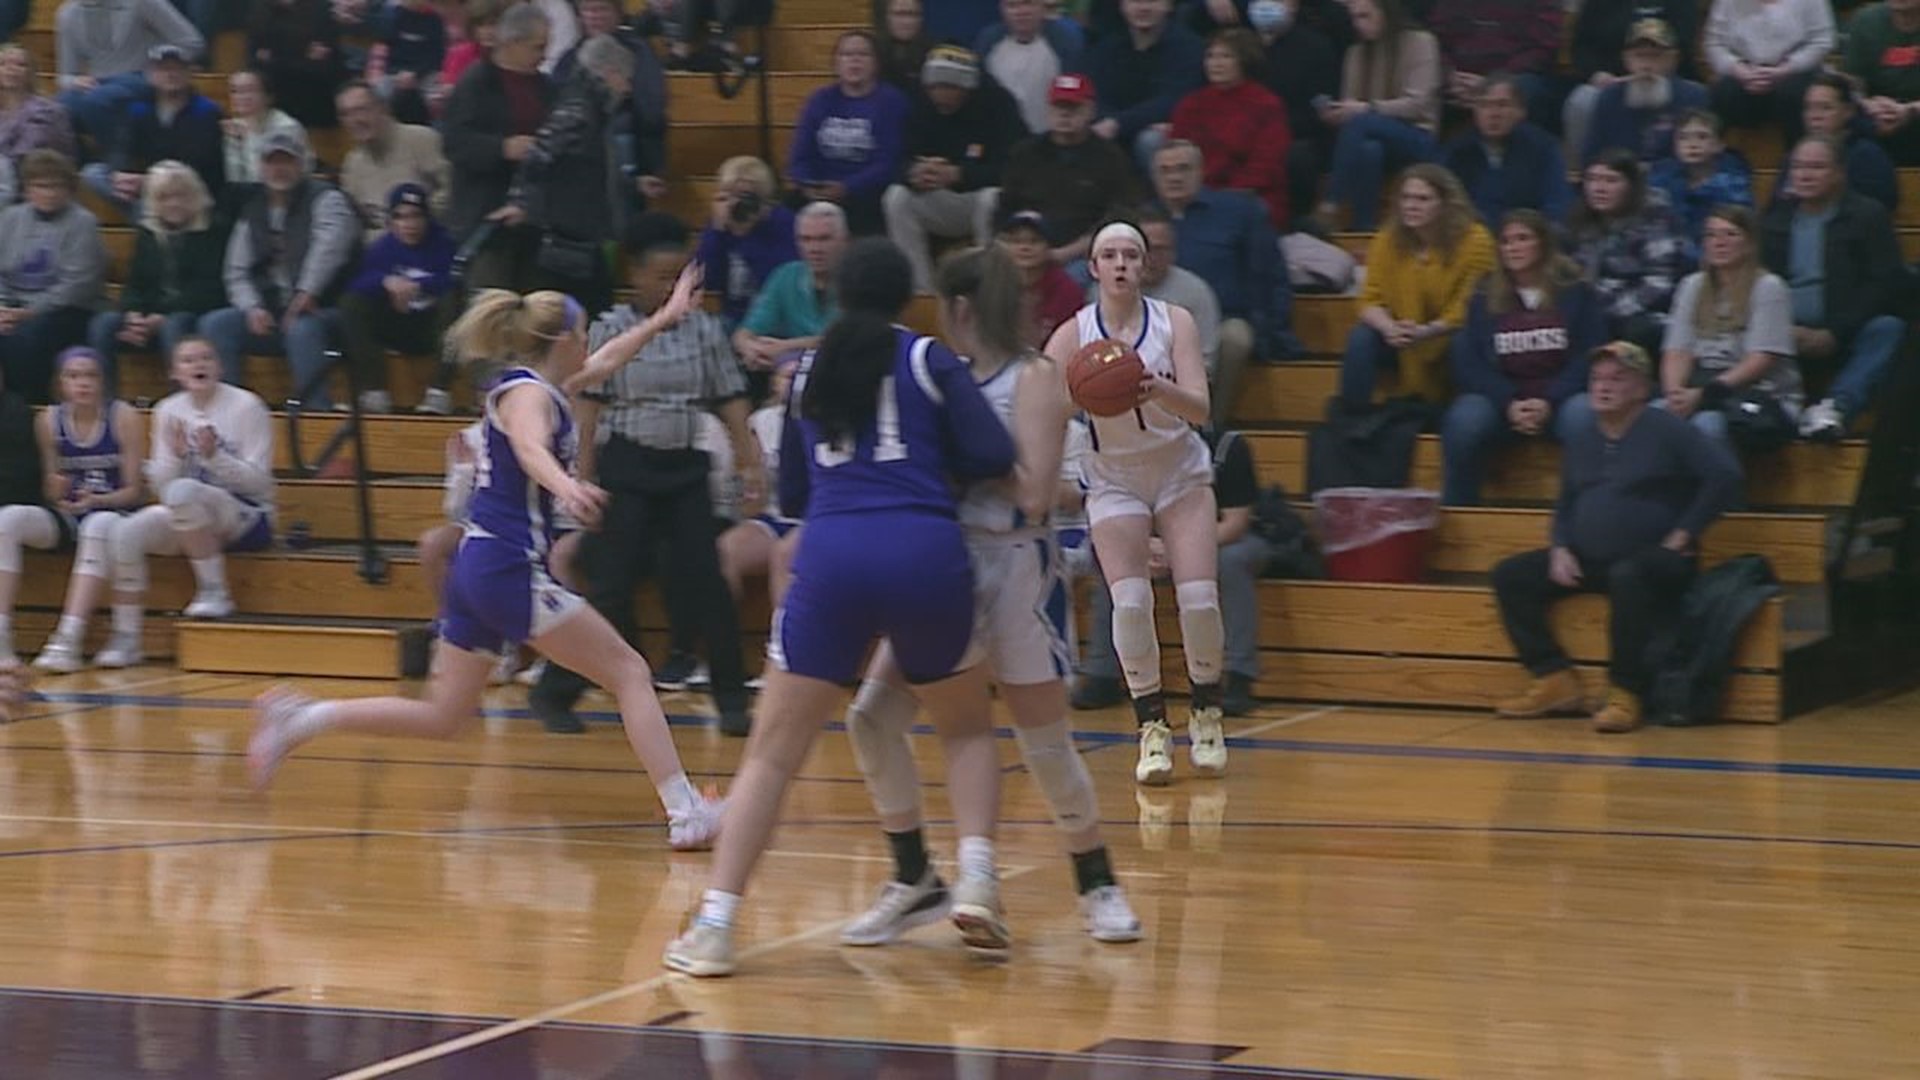 Moriah Murray Scored a Game-High 32 Points in Dunmore's 51-25 Win Over Shamokin in the PIAA Class 4A State Tournament